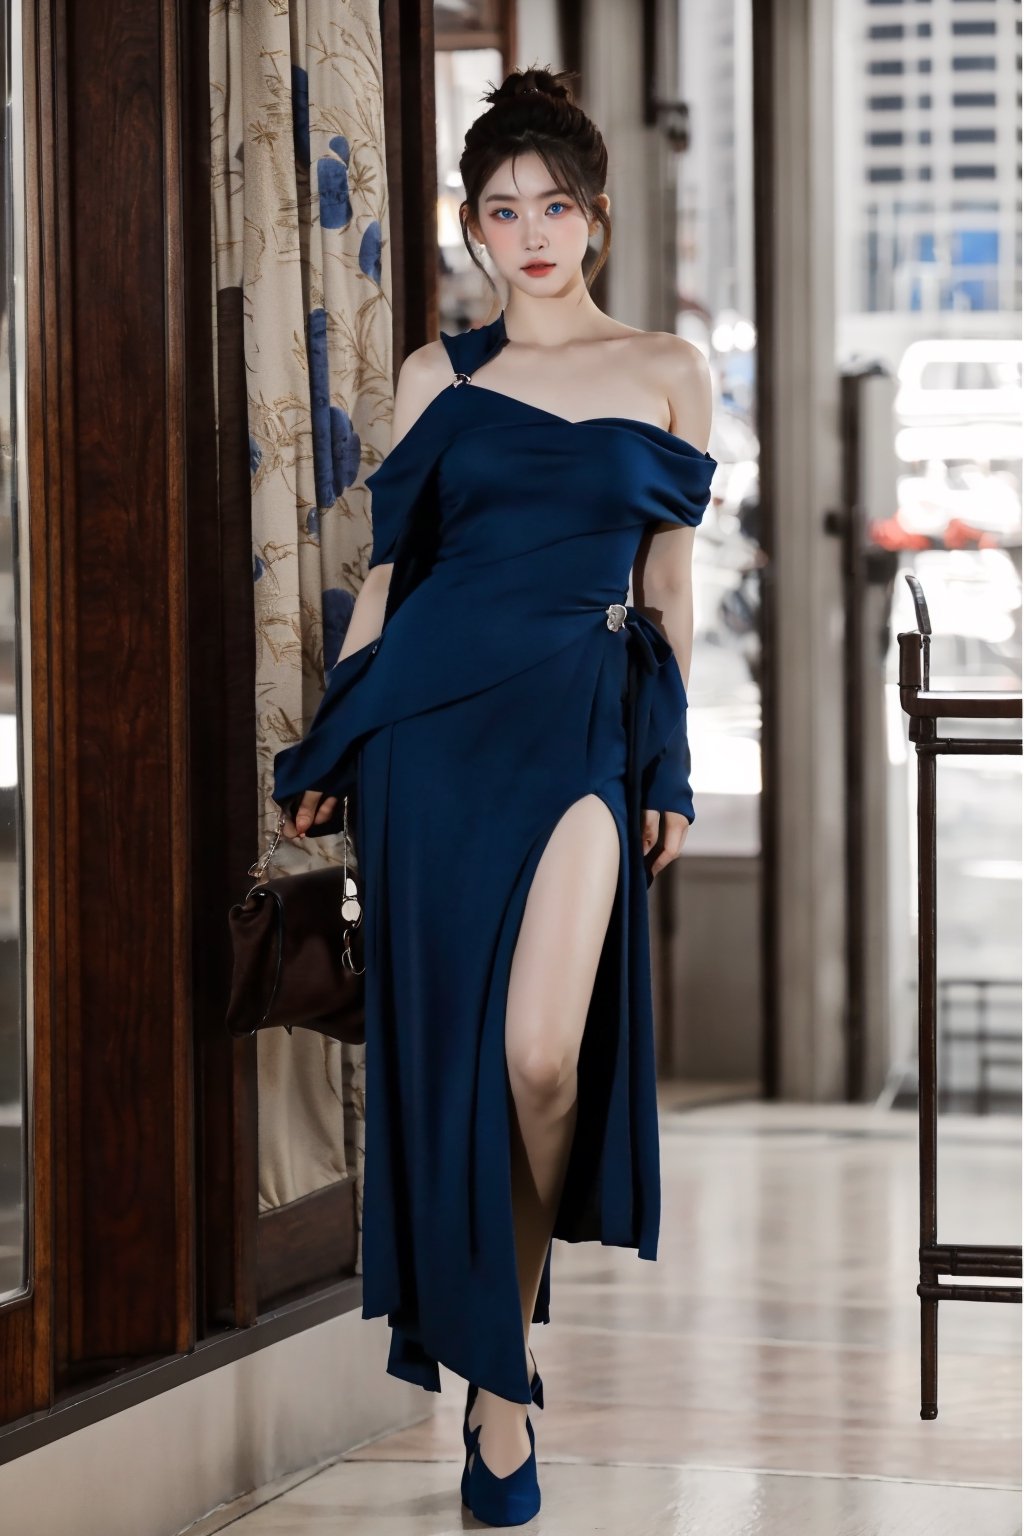 a realistic, cute model japanese girl blue eye, ultra real full body standing shot photo of 20 years old woman, Blue eyes. wearing a seductive outfit